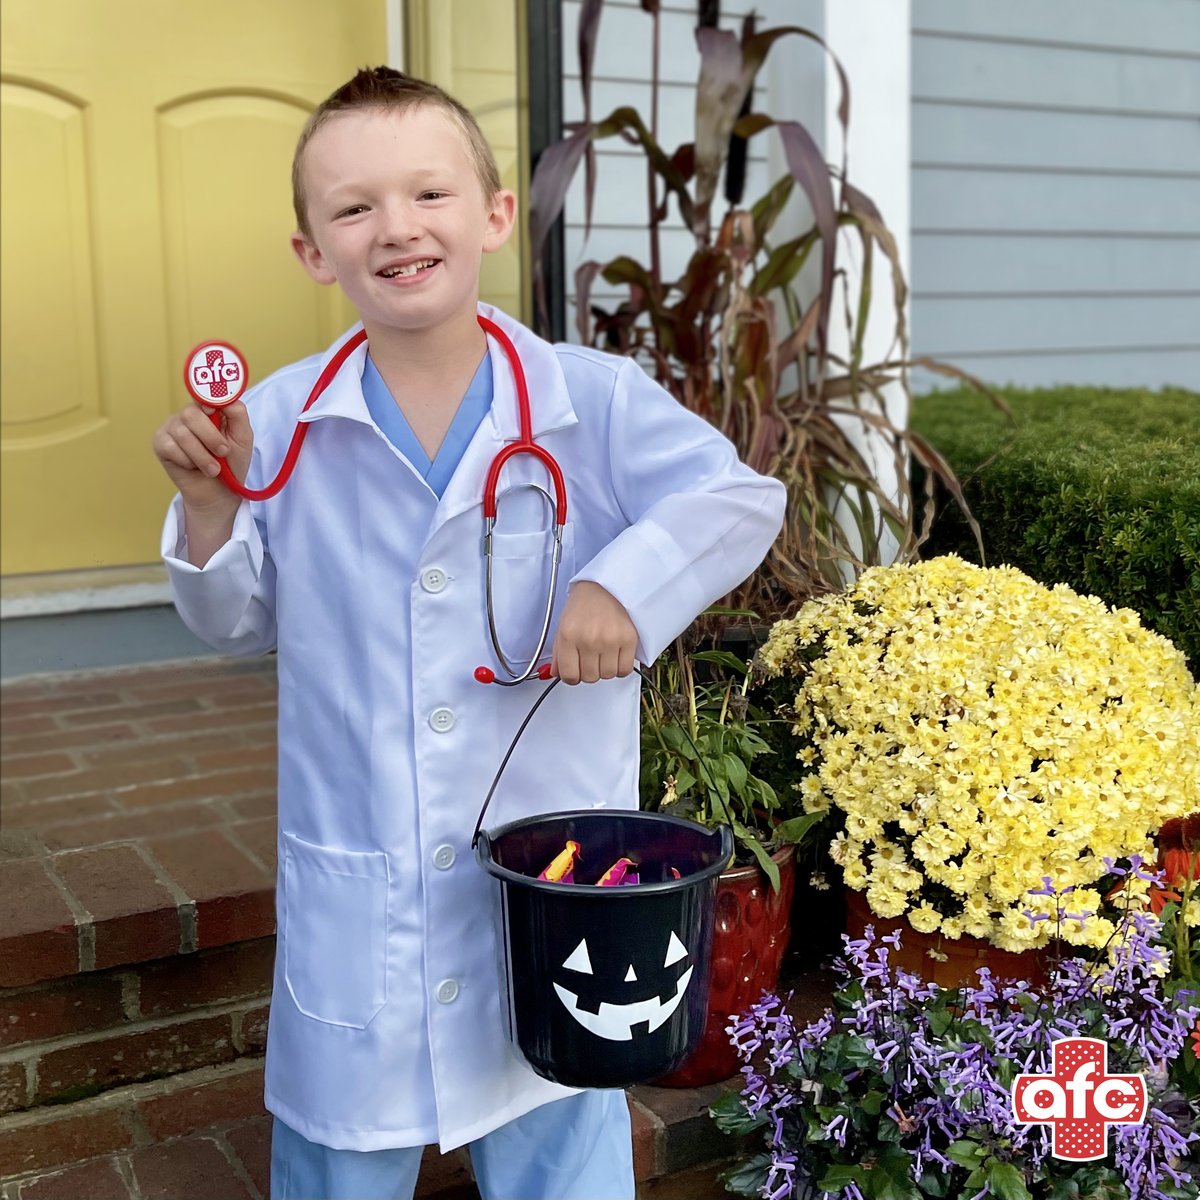 Stay safe out there trick-or-treaters. Happy Halloween! 🎃

#afcurgentcare #urgentcarenearme #urgentcarewestchester #happyhalloween